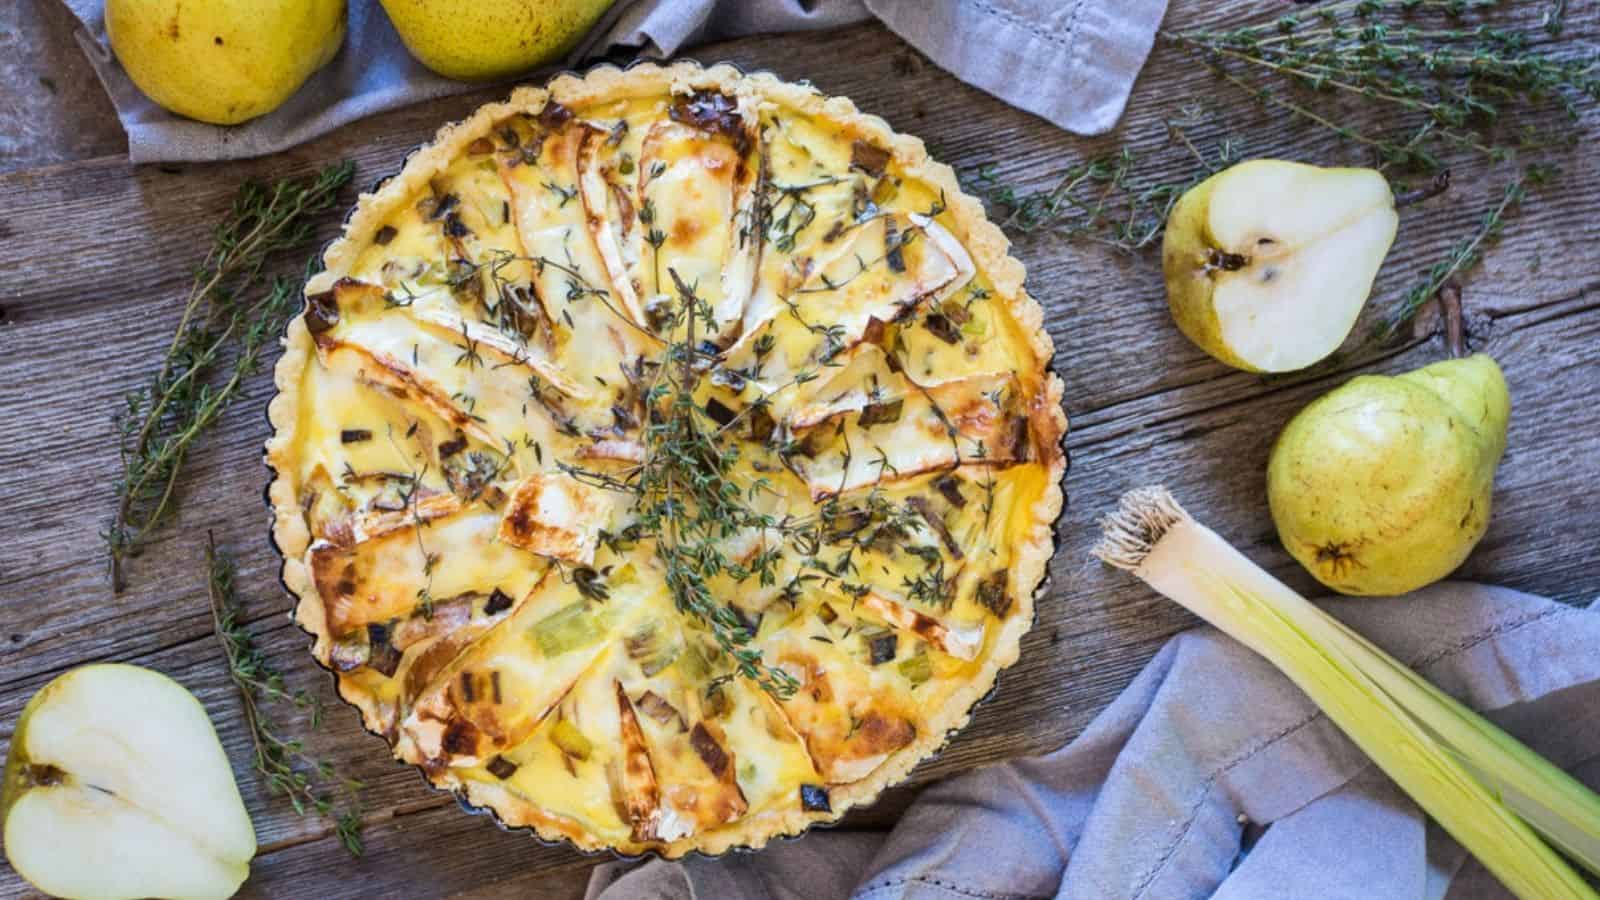 A quiche with pears and sprigs of thyme.